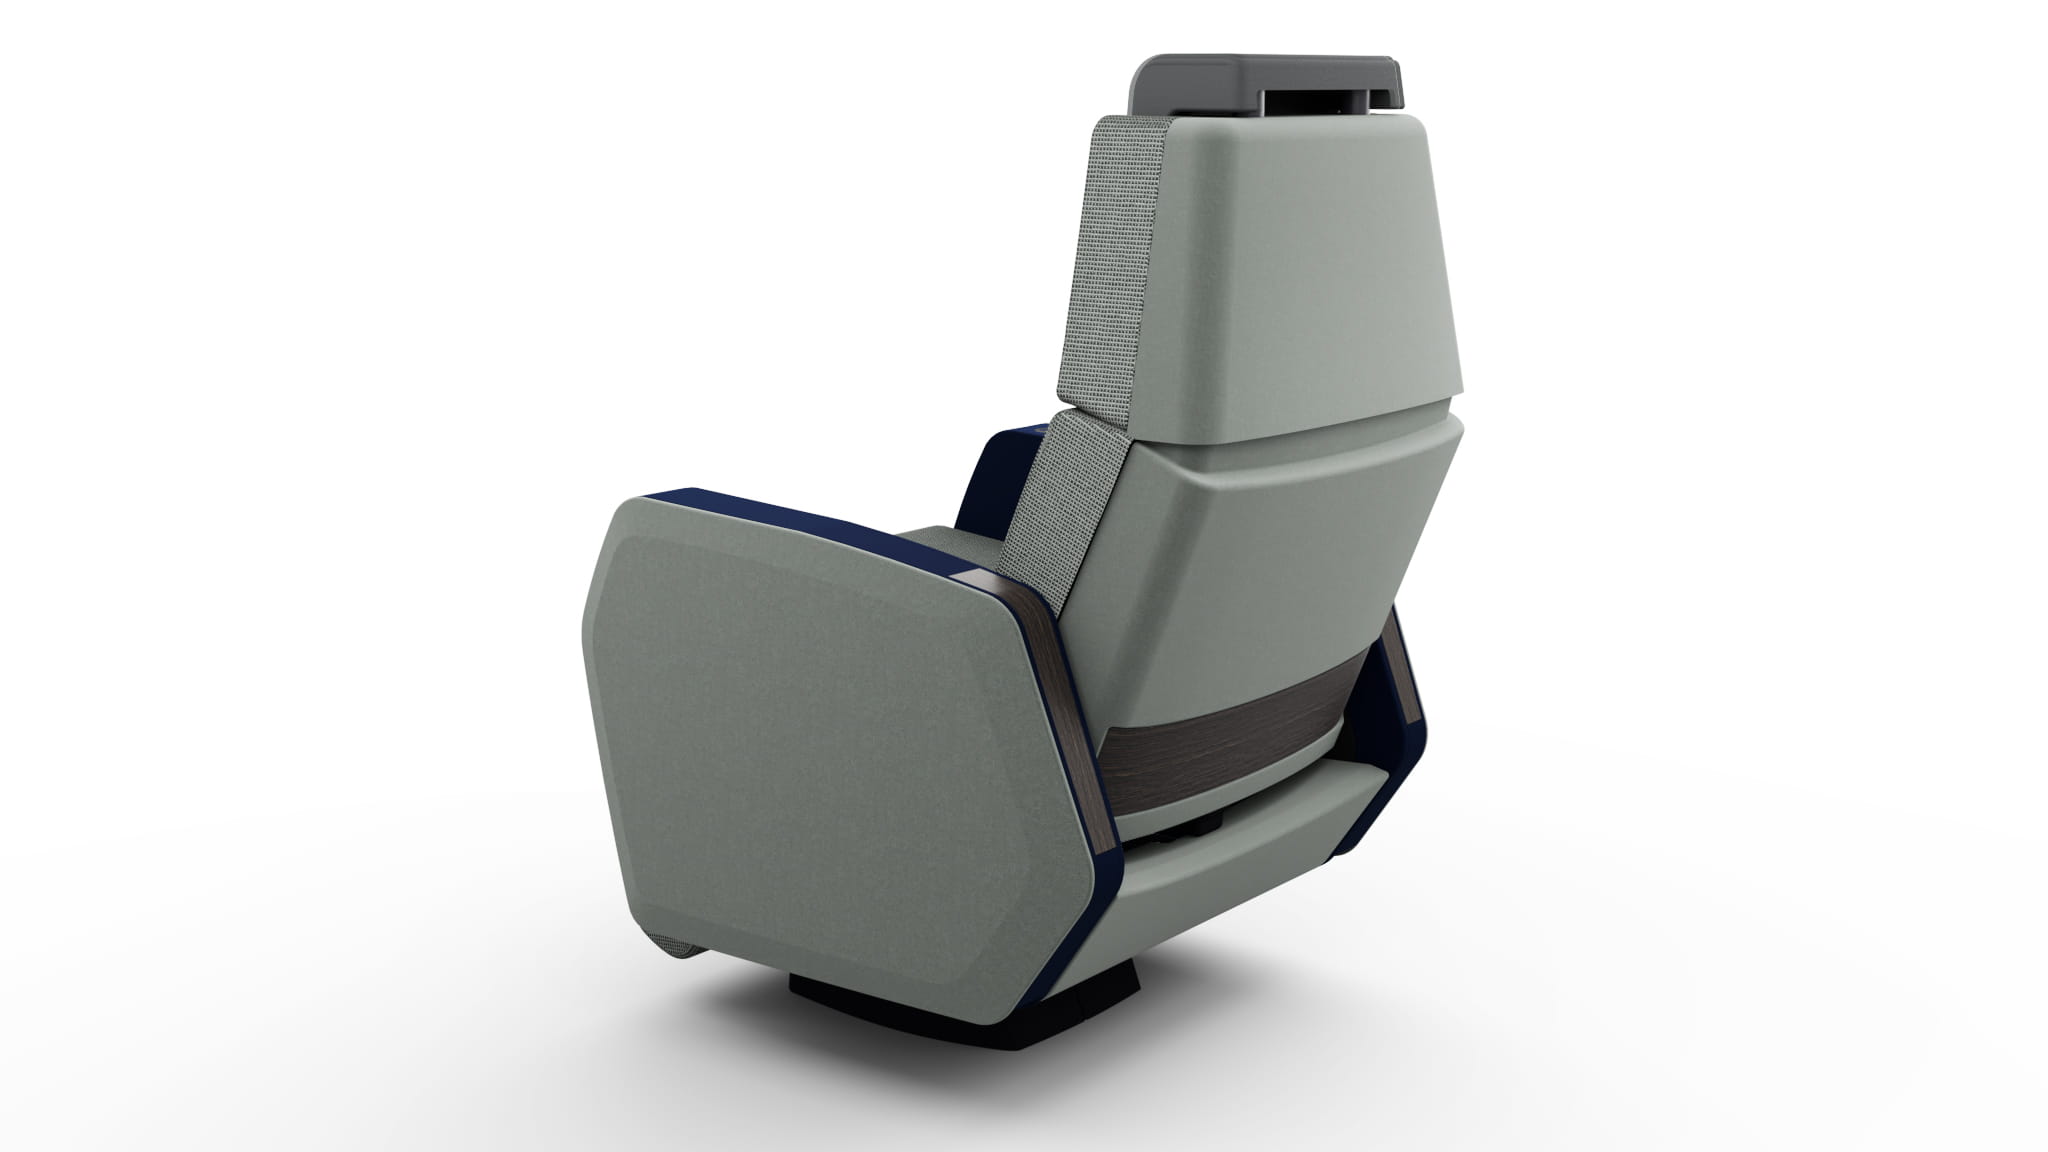 Airline seat back view